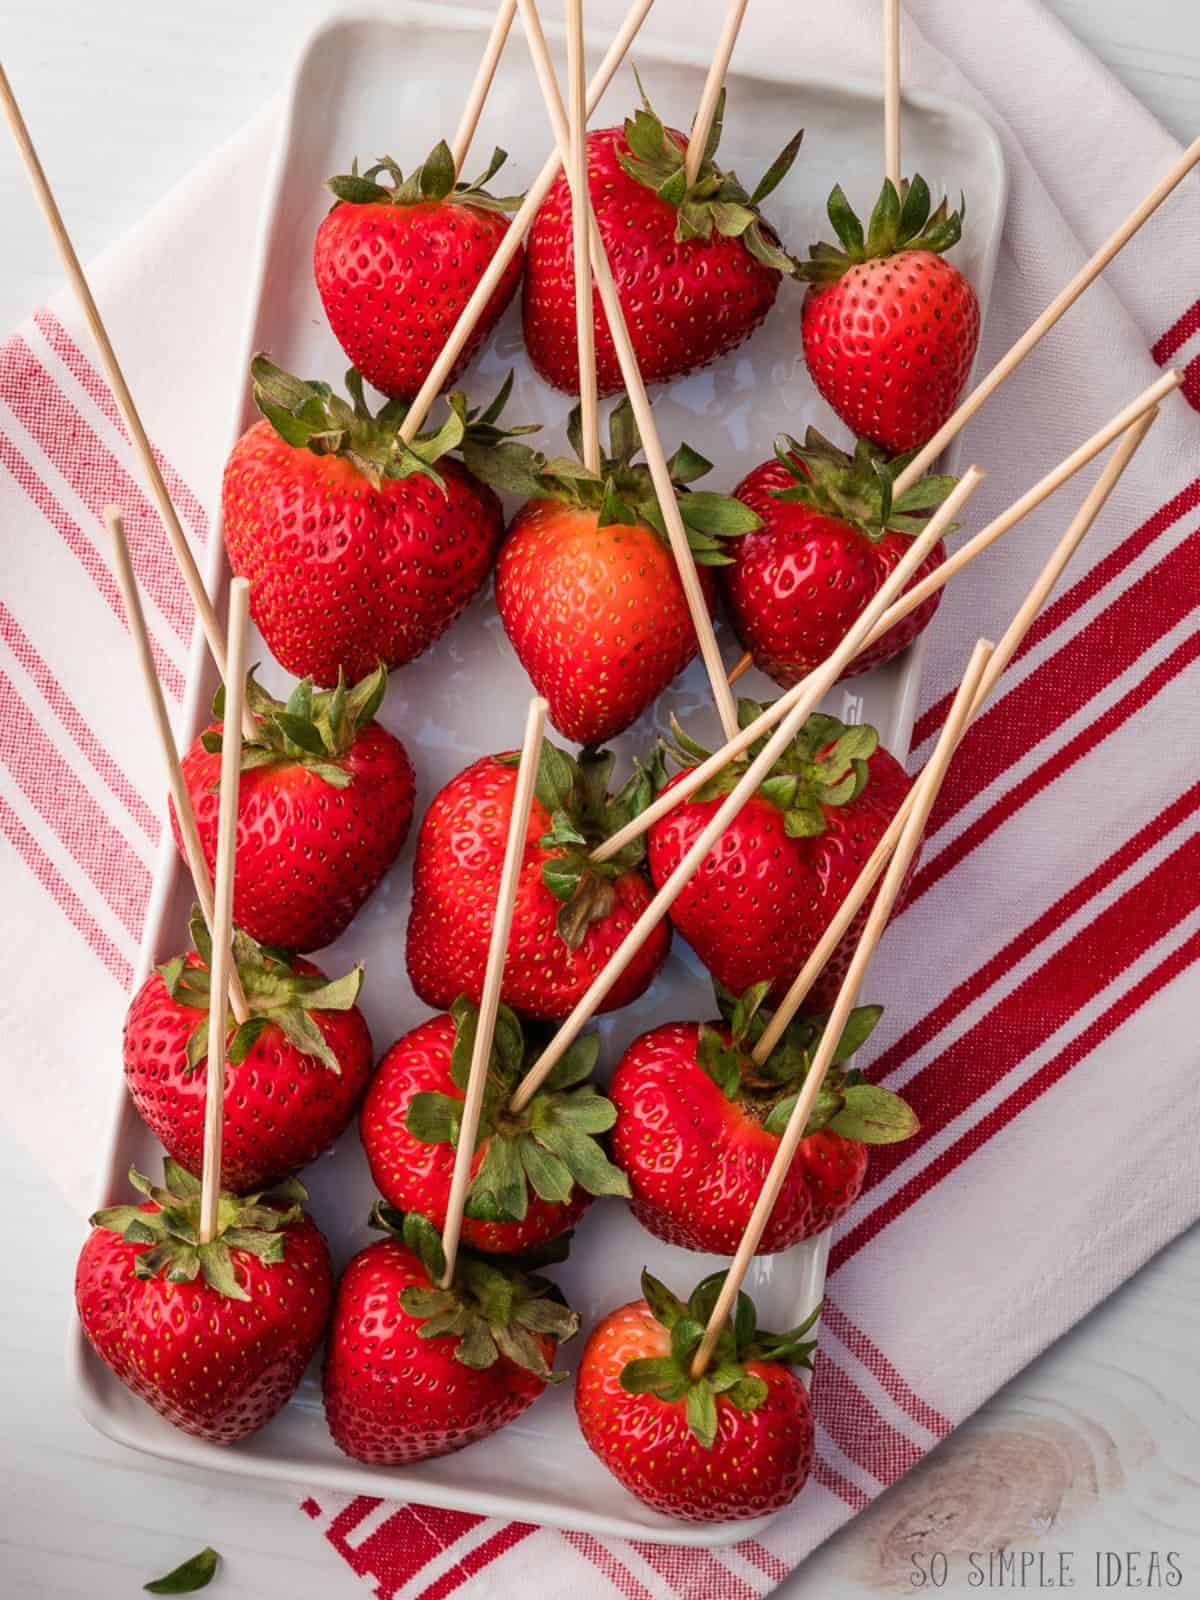 skewered strawberries on a white rectangular plate.